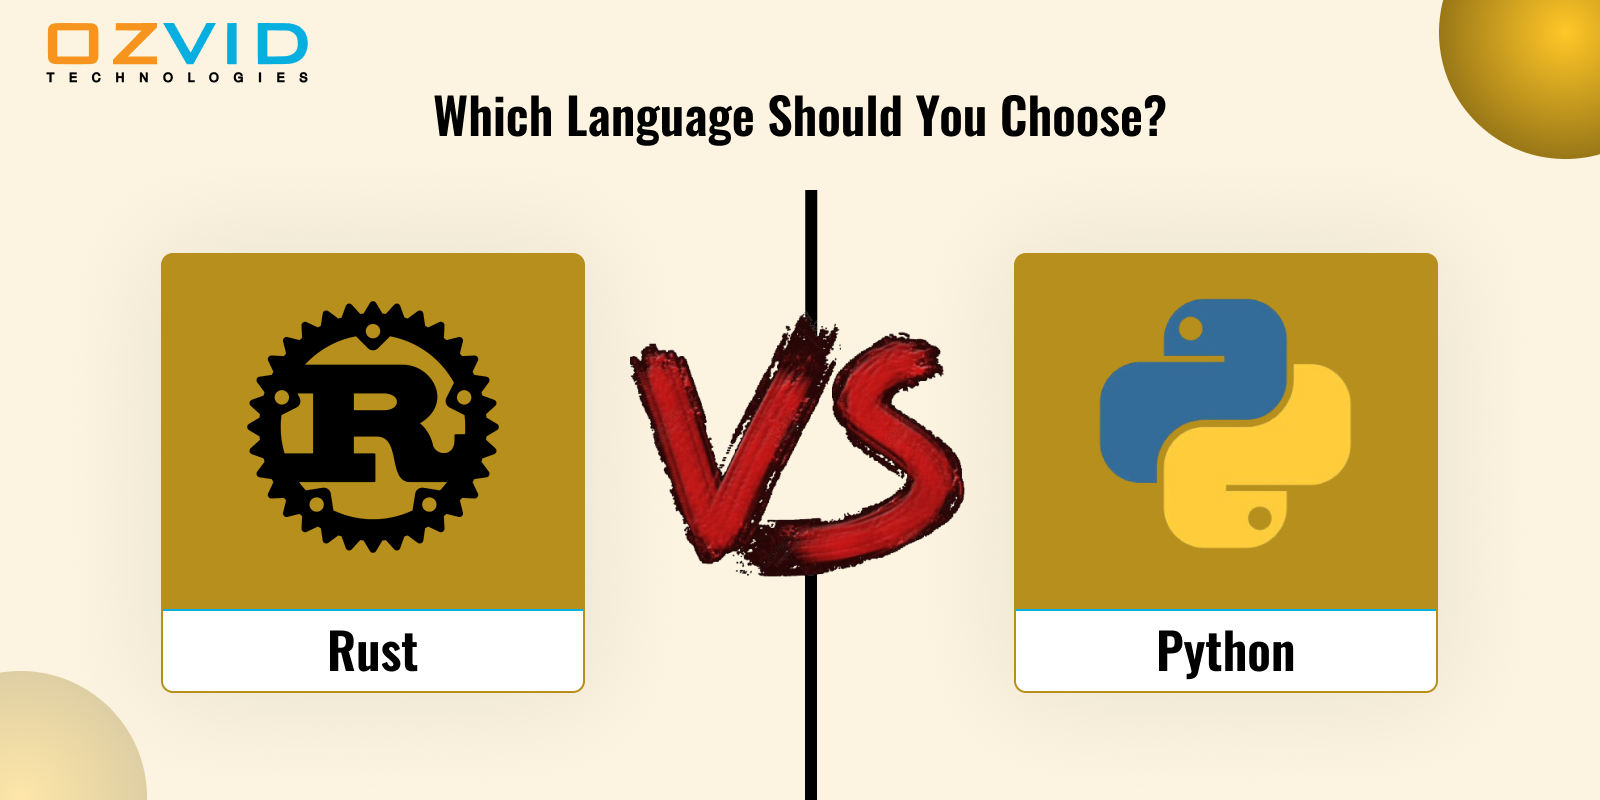 Rust vs. Python: Which Language Should You Choose?